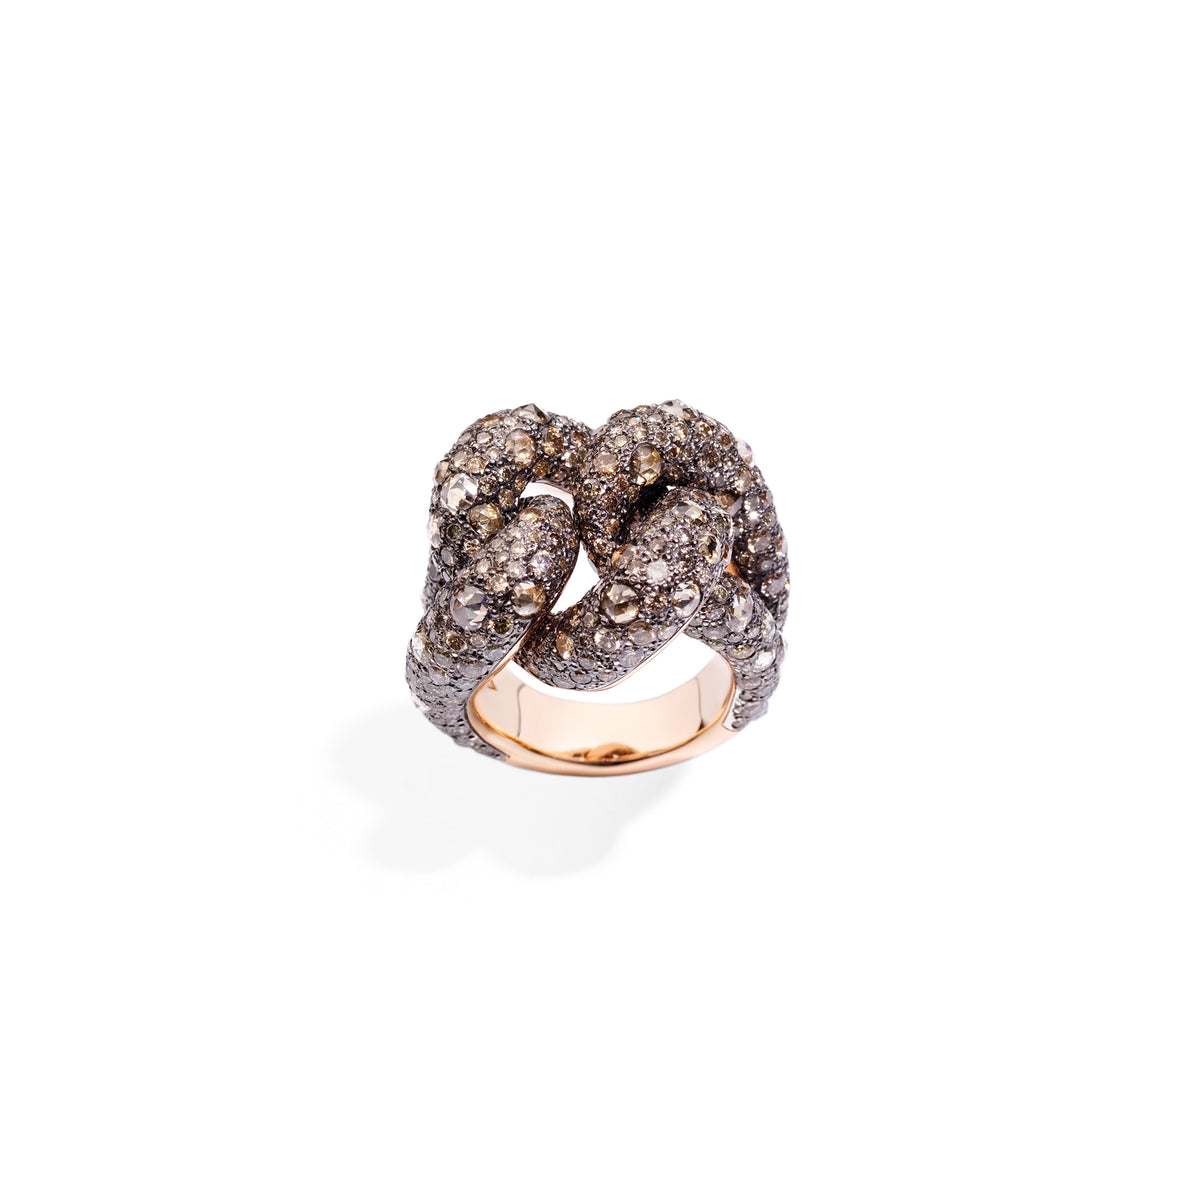 Tango Ring in 18k Rose Gold and Burnished Silver with 392 Brown Diamonds - Orsini Jewellers NZ